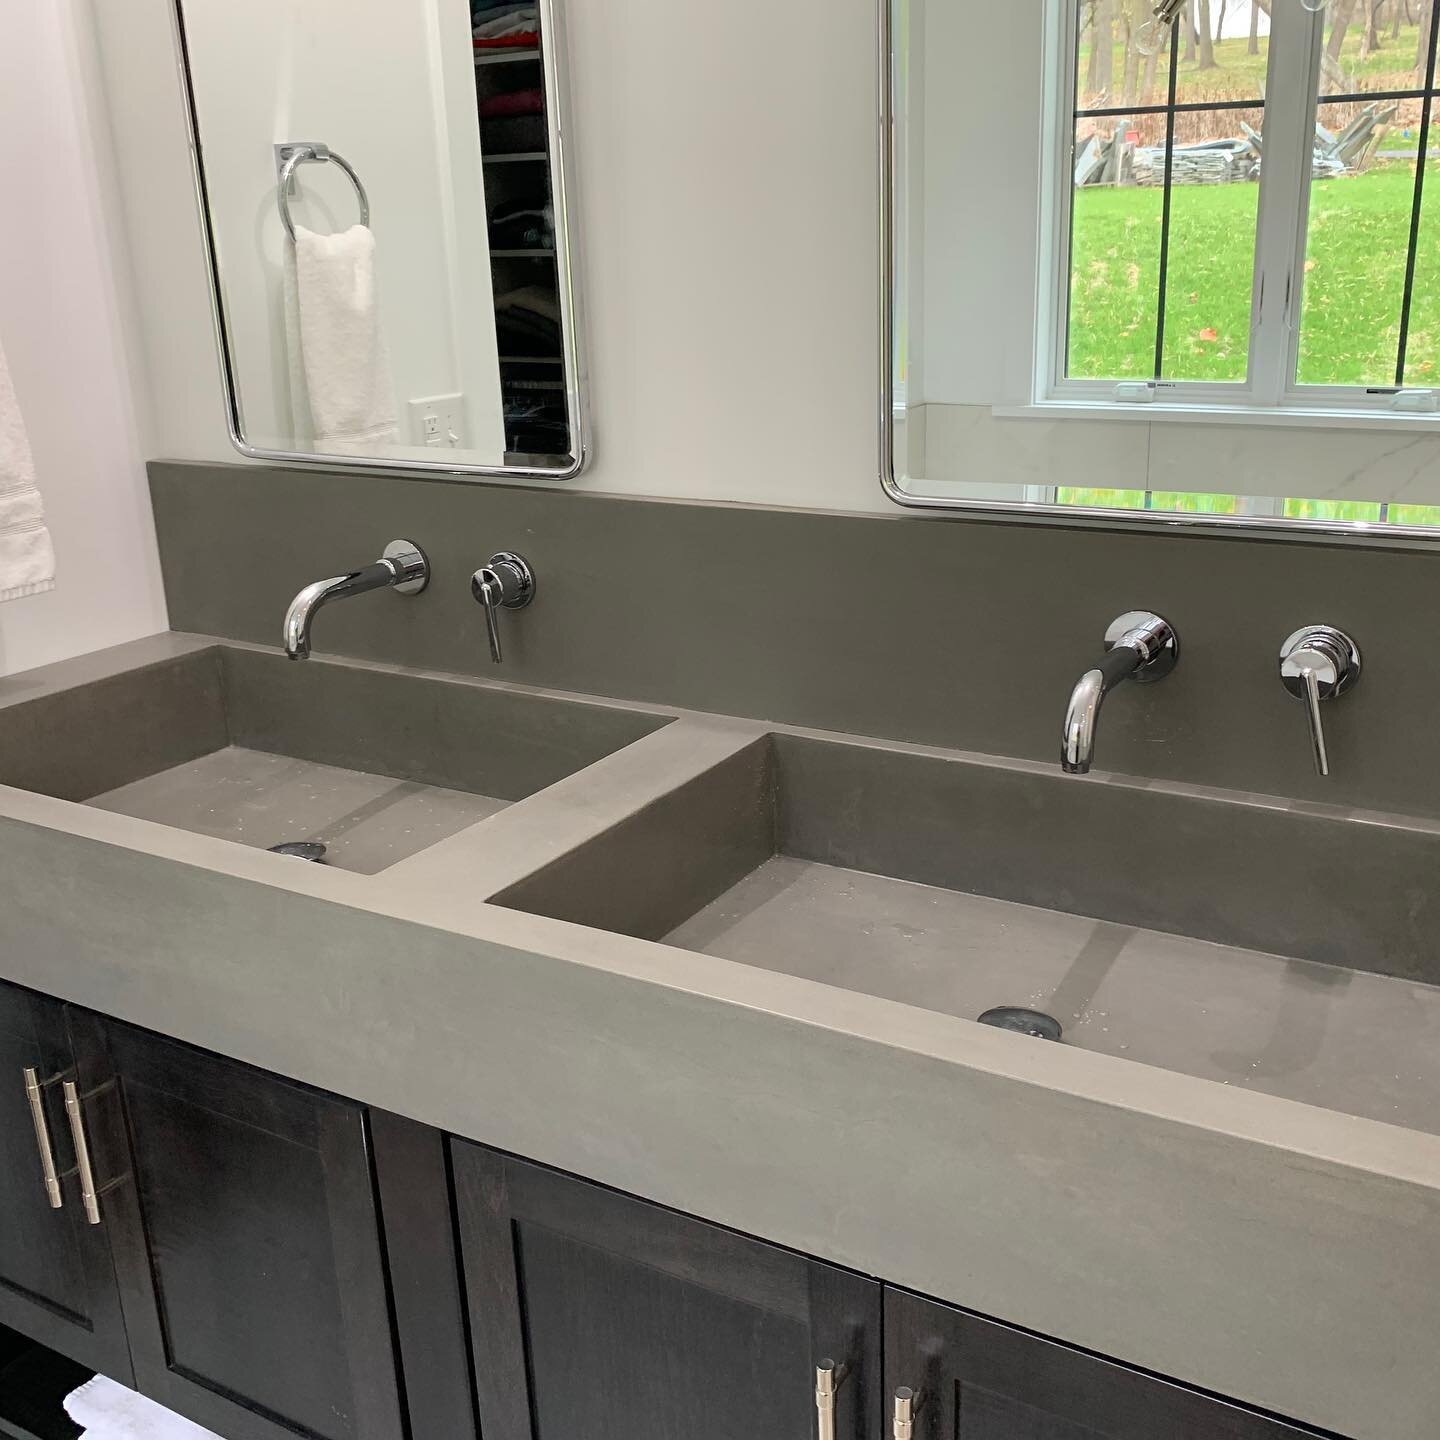 Another beautiful completion shot from one of our amazing clients! #concretesink #concretesinks #troughsink #sink #basin #bathroomdesign #bathroomremodel #bathroom #concretedesign #concretevanity #customconcrete #handmade #stogsconcretedesign #shipsn